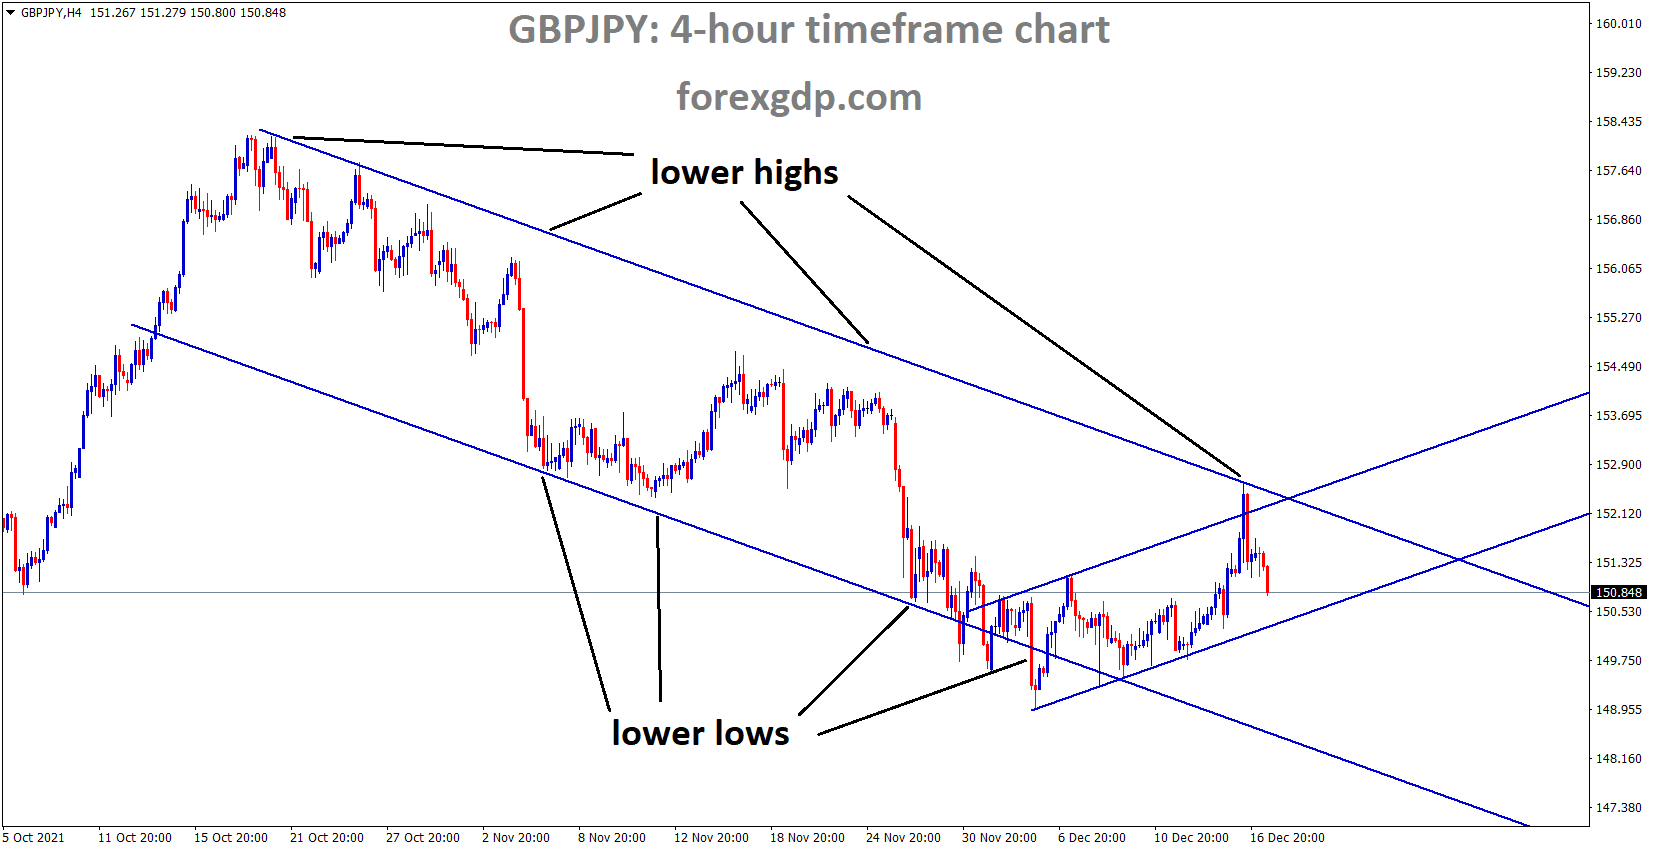 GBPJPY is moving in the Descending channel and the market fell from the lower high area